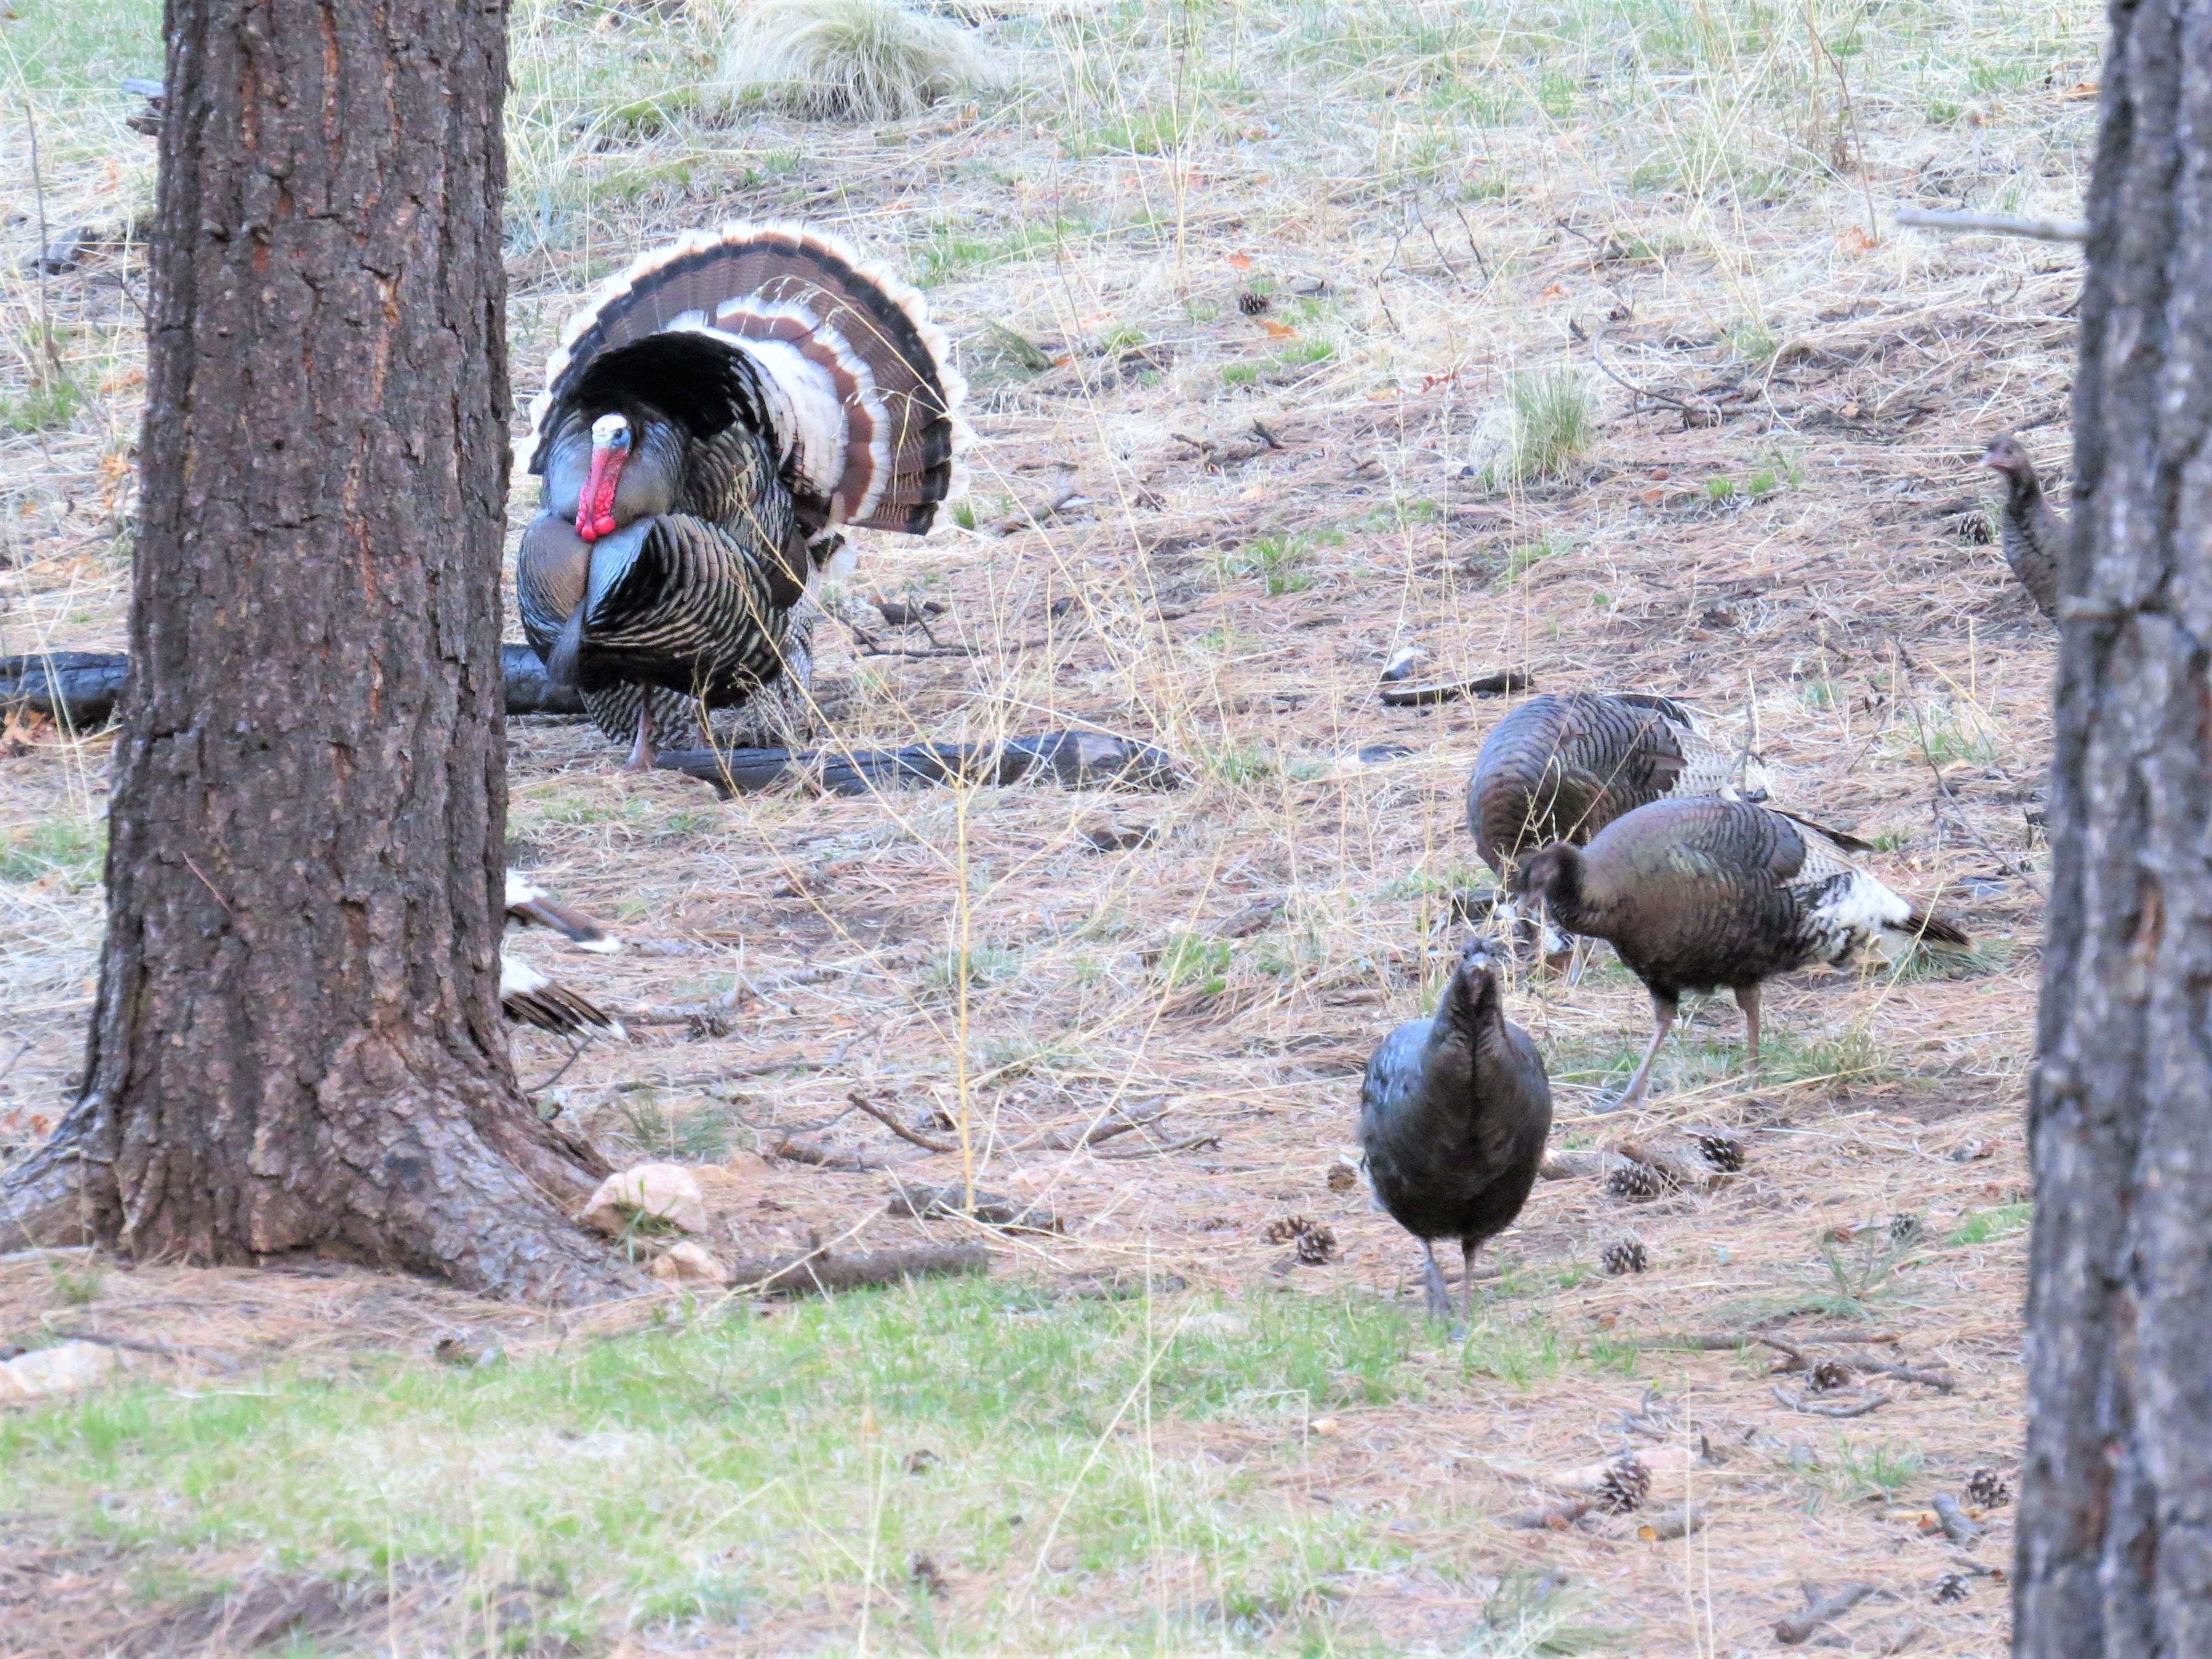 Wild Turkey hens and a tom too!